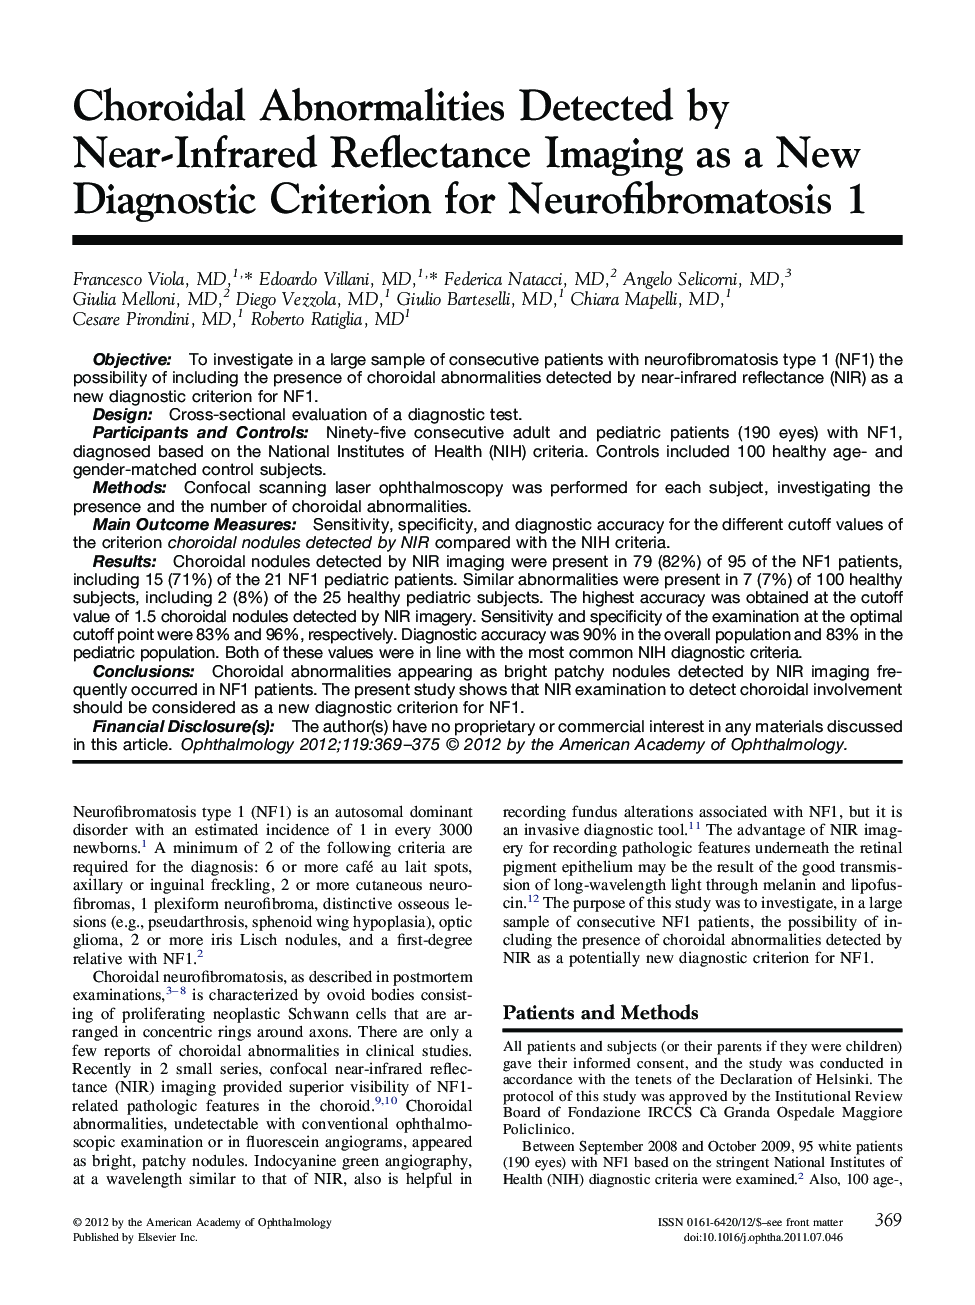 Choroidal Abnormalities Detected by Near-Infrared Reflectance Imaging as a New Diagnostic Criterion for Neurofibromatosis 1